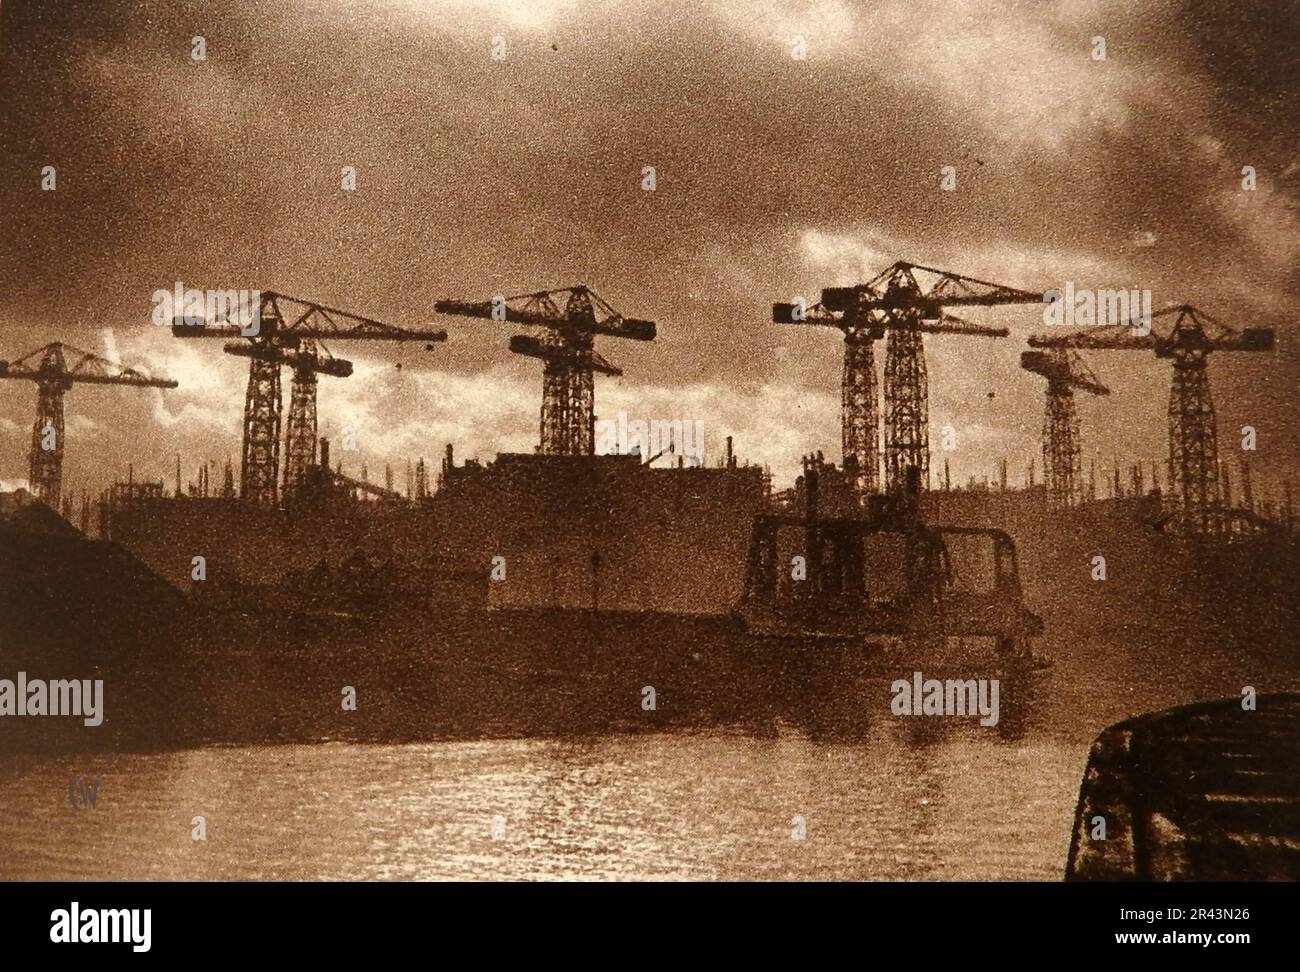 A 1939 old photograph of shipyard cranes on the Clyde, Glasgow, Scotland. Stock Photo